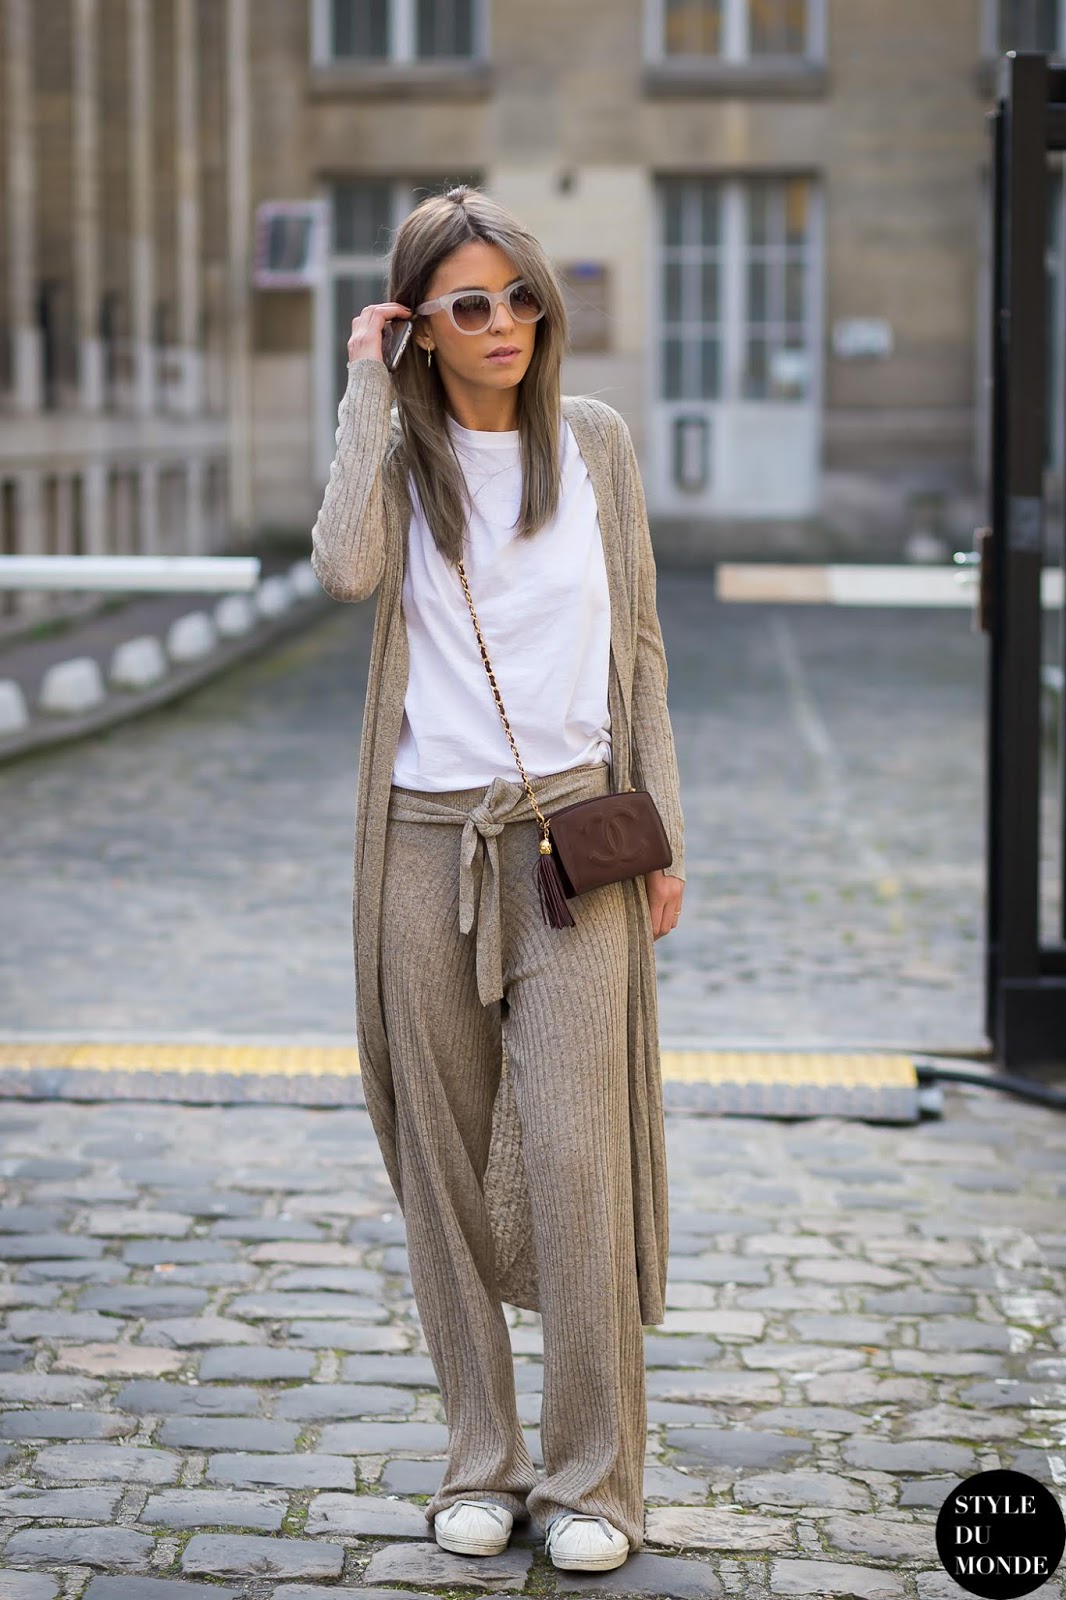 We're Obsessed With This Luxe Loungewear Look